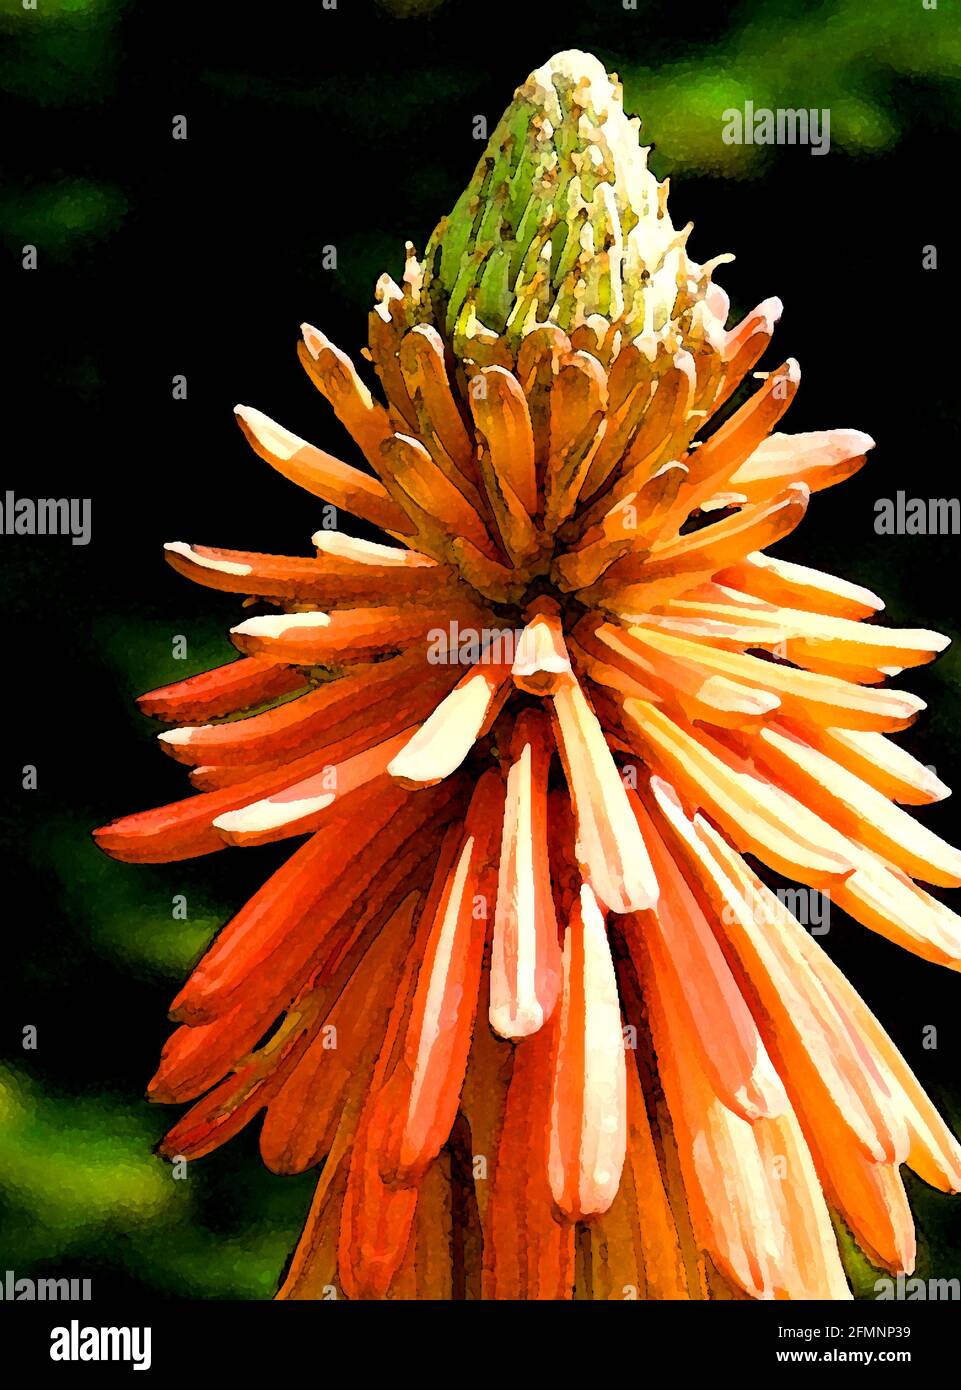 Red-Hot Poker (Kniphofia uvaria) One of Forty-two Iconic Images of English Garden Flowers, Wildflowers and Rural Landscapes. Stock Photo